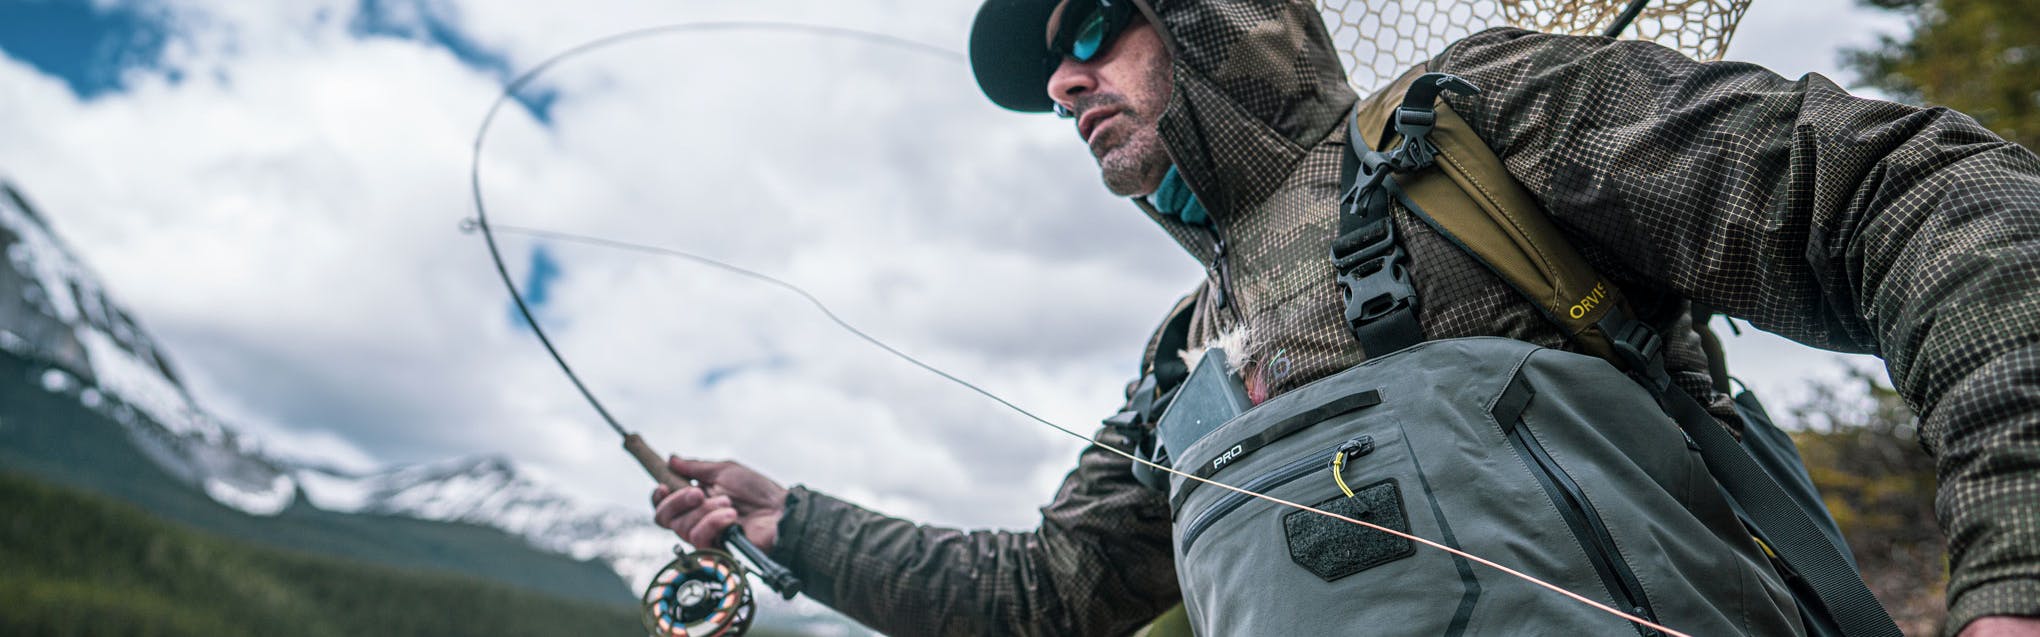 Gear Review: Orvis Gear Roundup Spencer Durrant Outdoors, 47% OFF